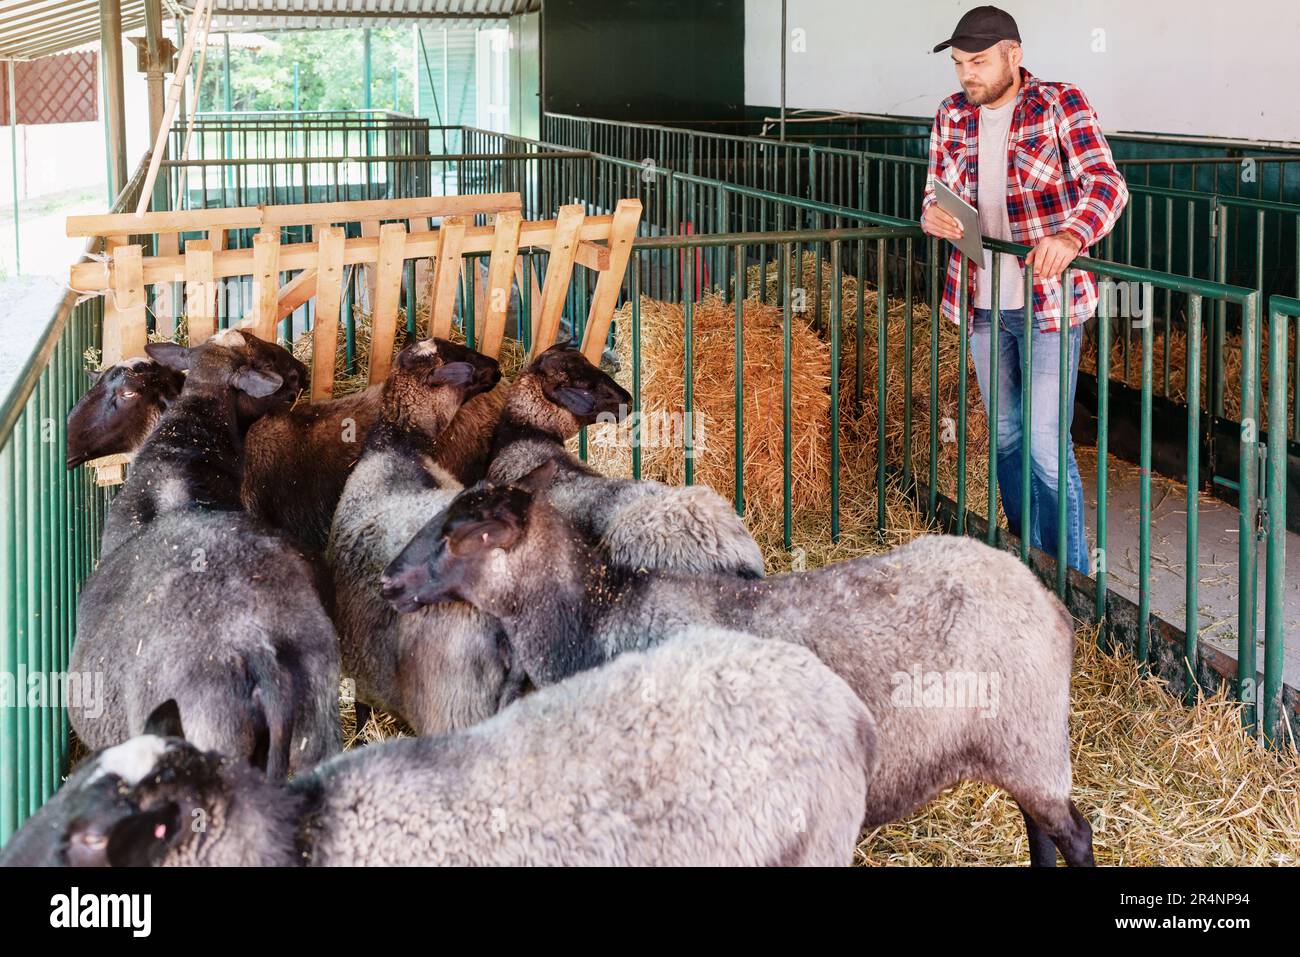 Livestock breeder with digital tablet and sheep in paddock at farm. Stock Photo